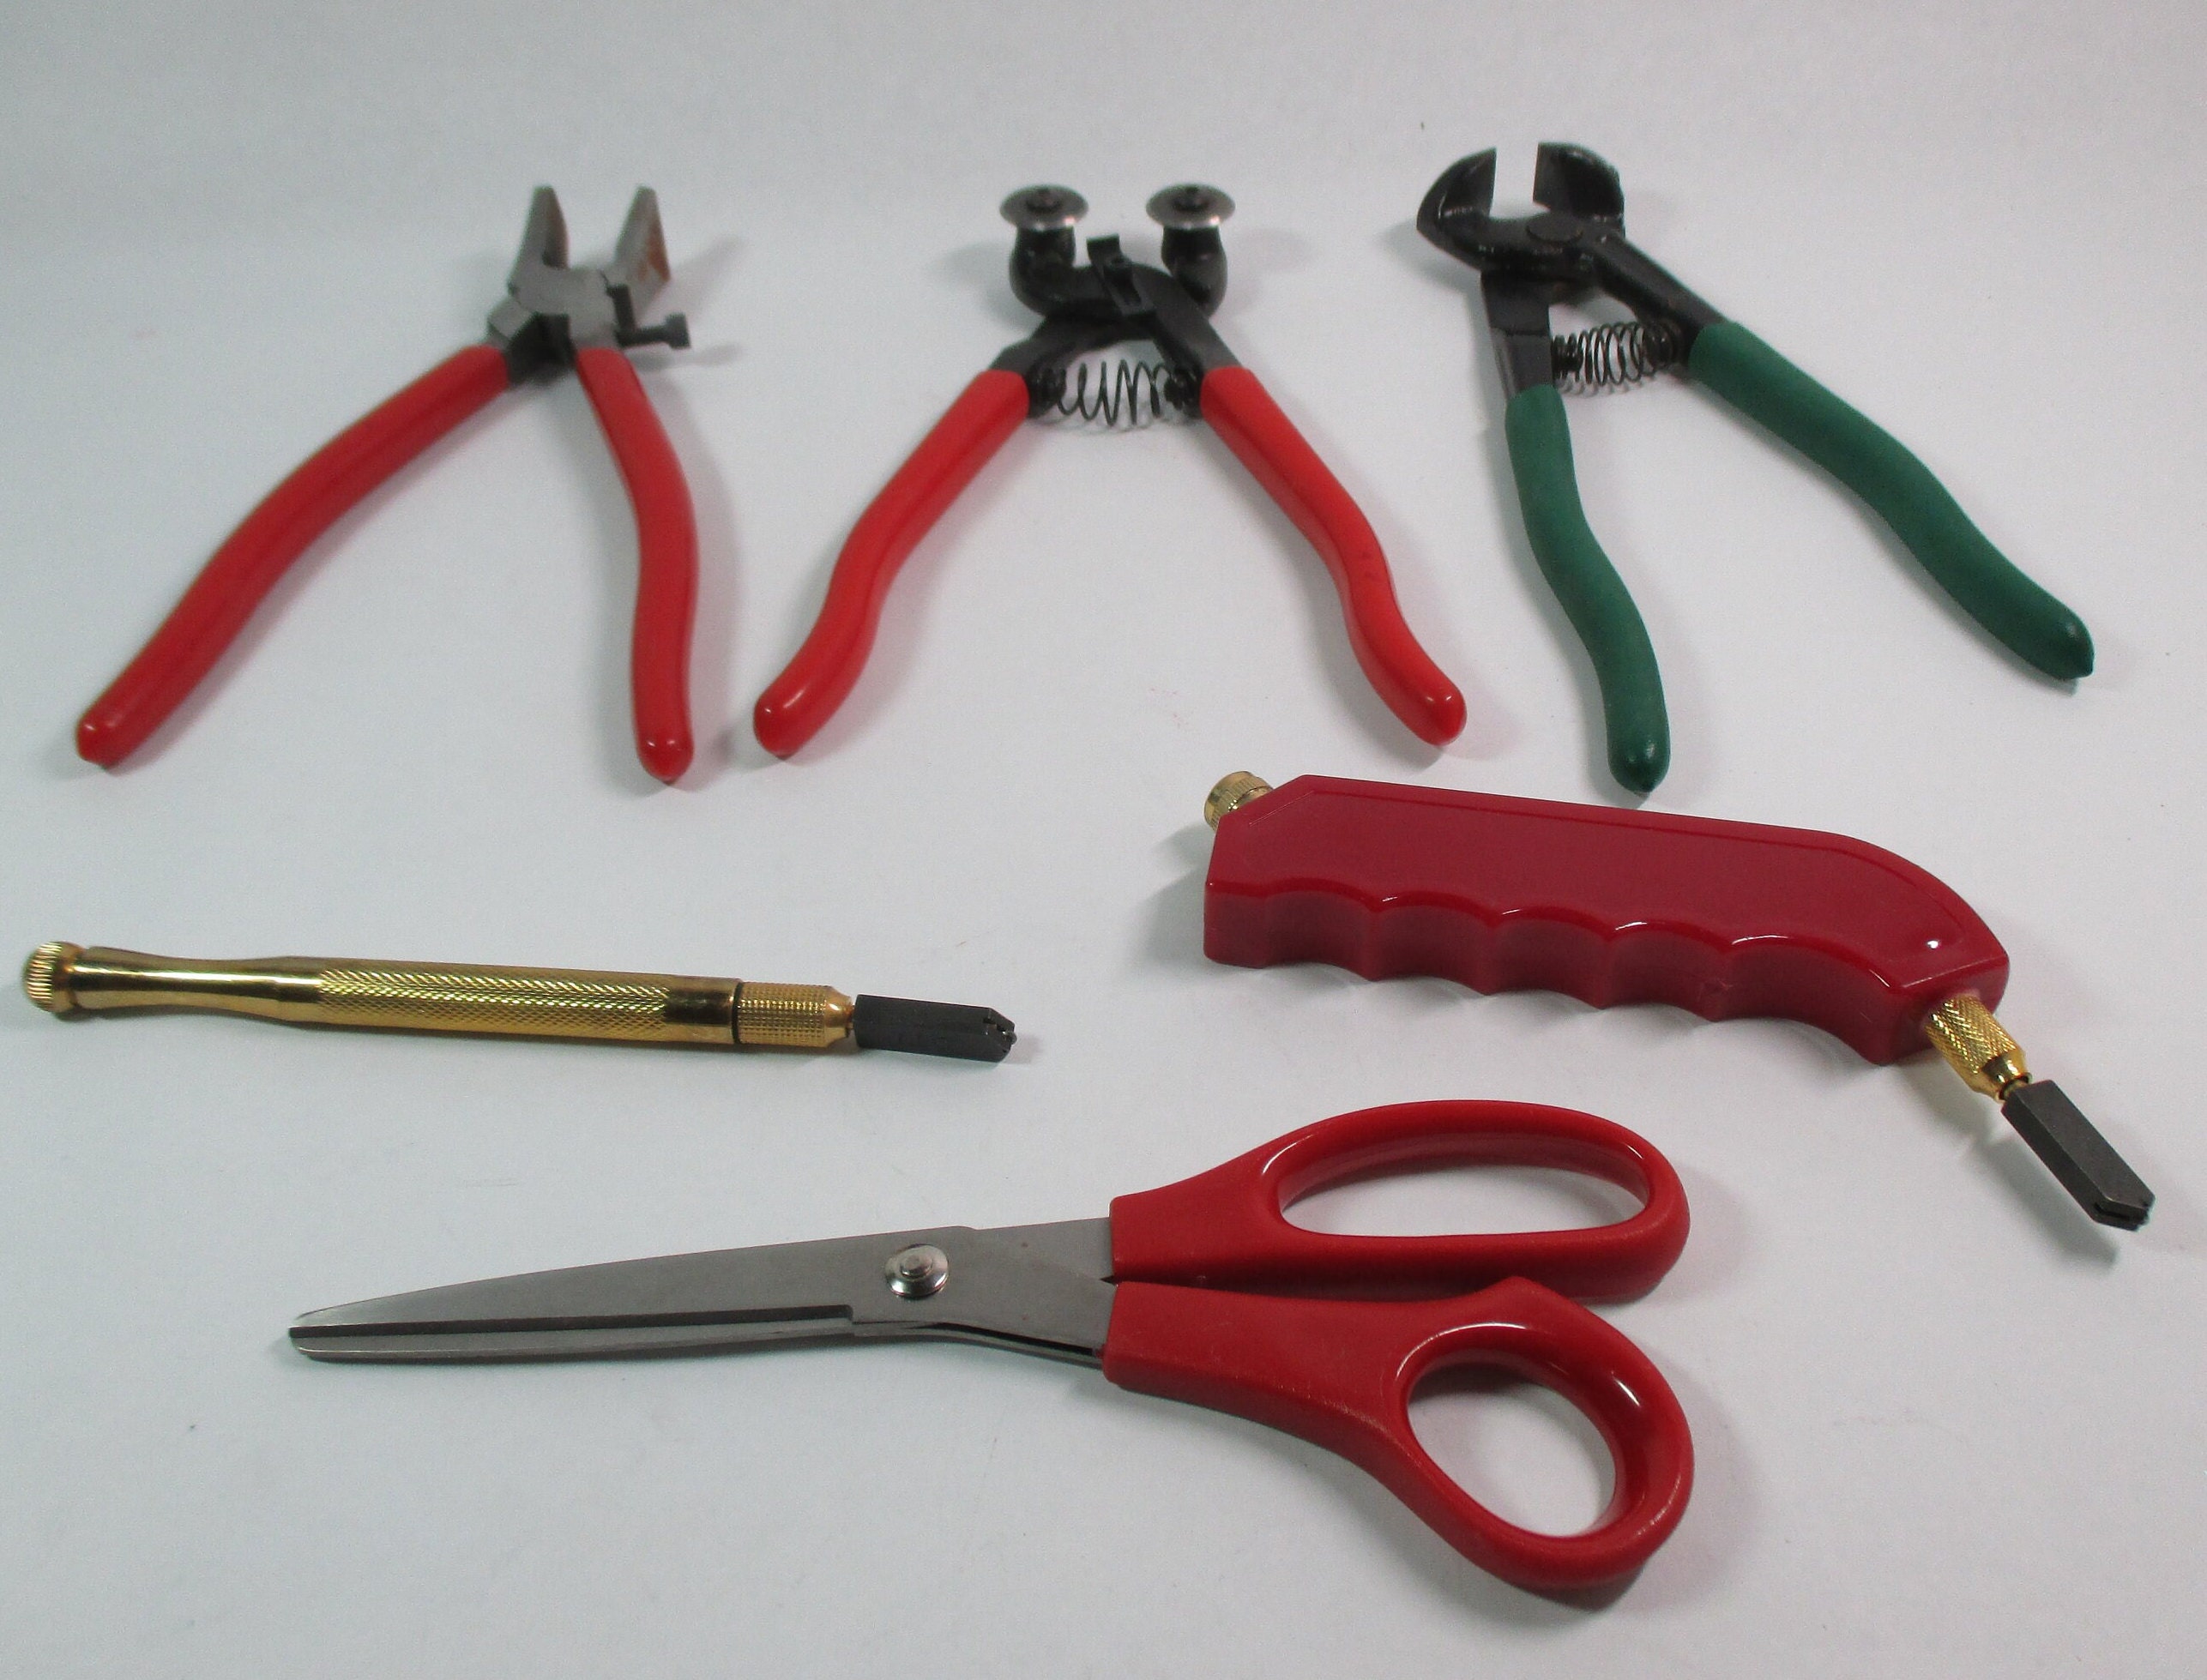 Stained Glass Cutter & Breaking Plier Tools for Stained Glass